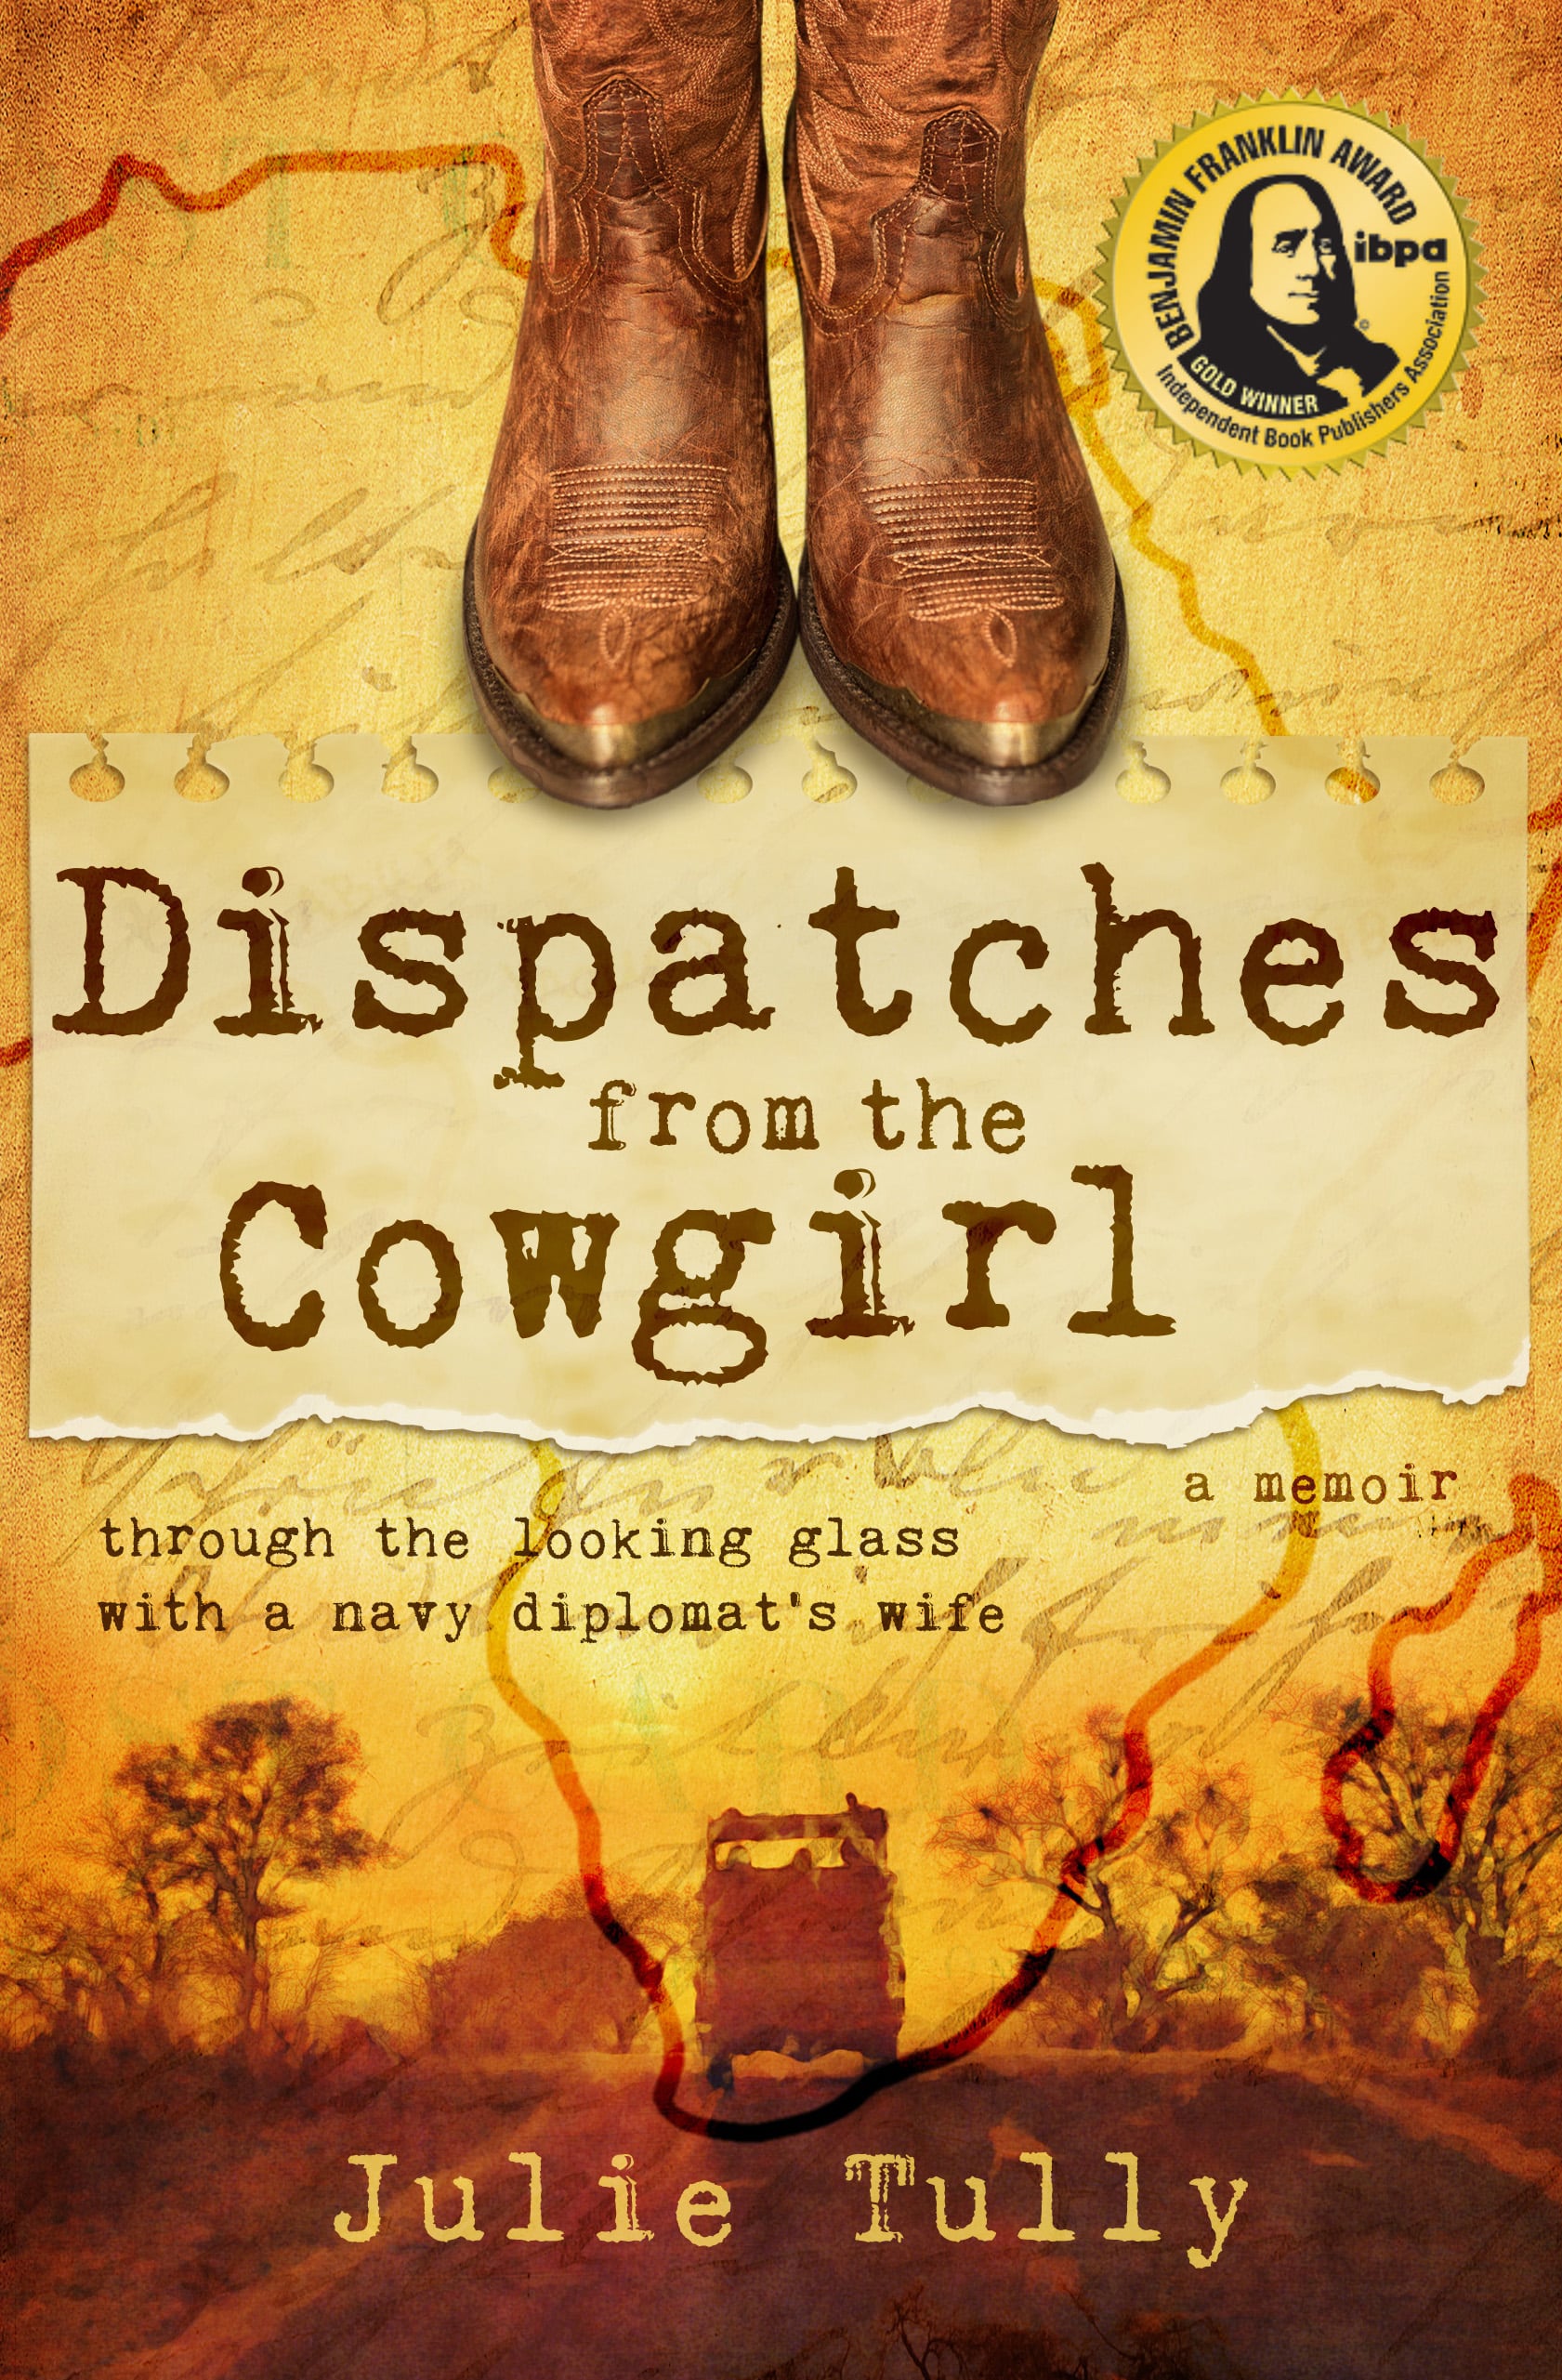 cover of Julie Tully's book Dispatches from the Cowgirl with an image of boots, a palm tree, and a truck driving on a rustic road and the subtitle "through the looking glass with a Navy Diplomat's wife" and "a memoir"